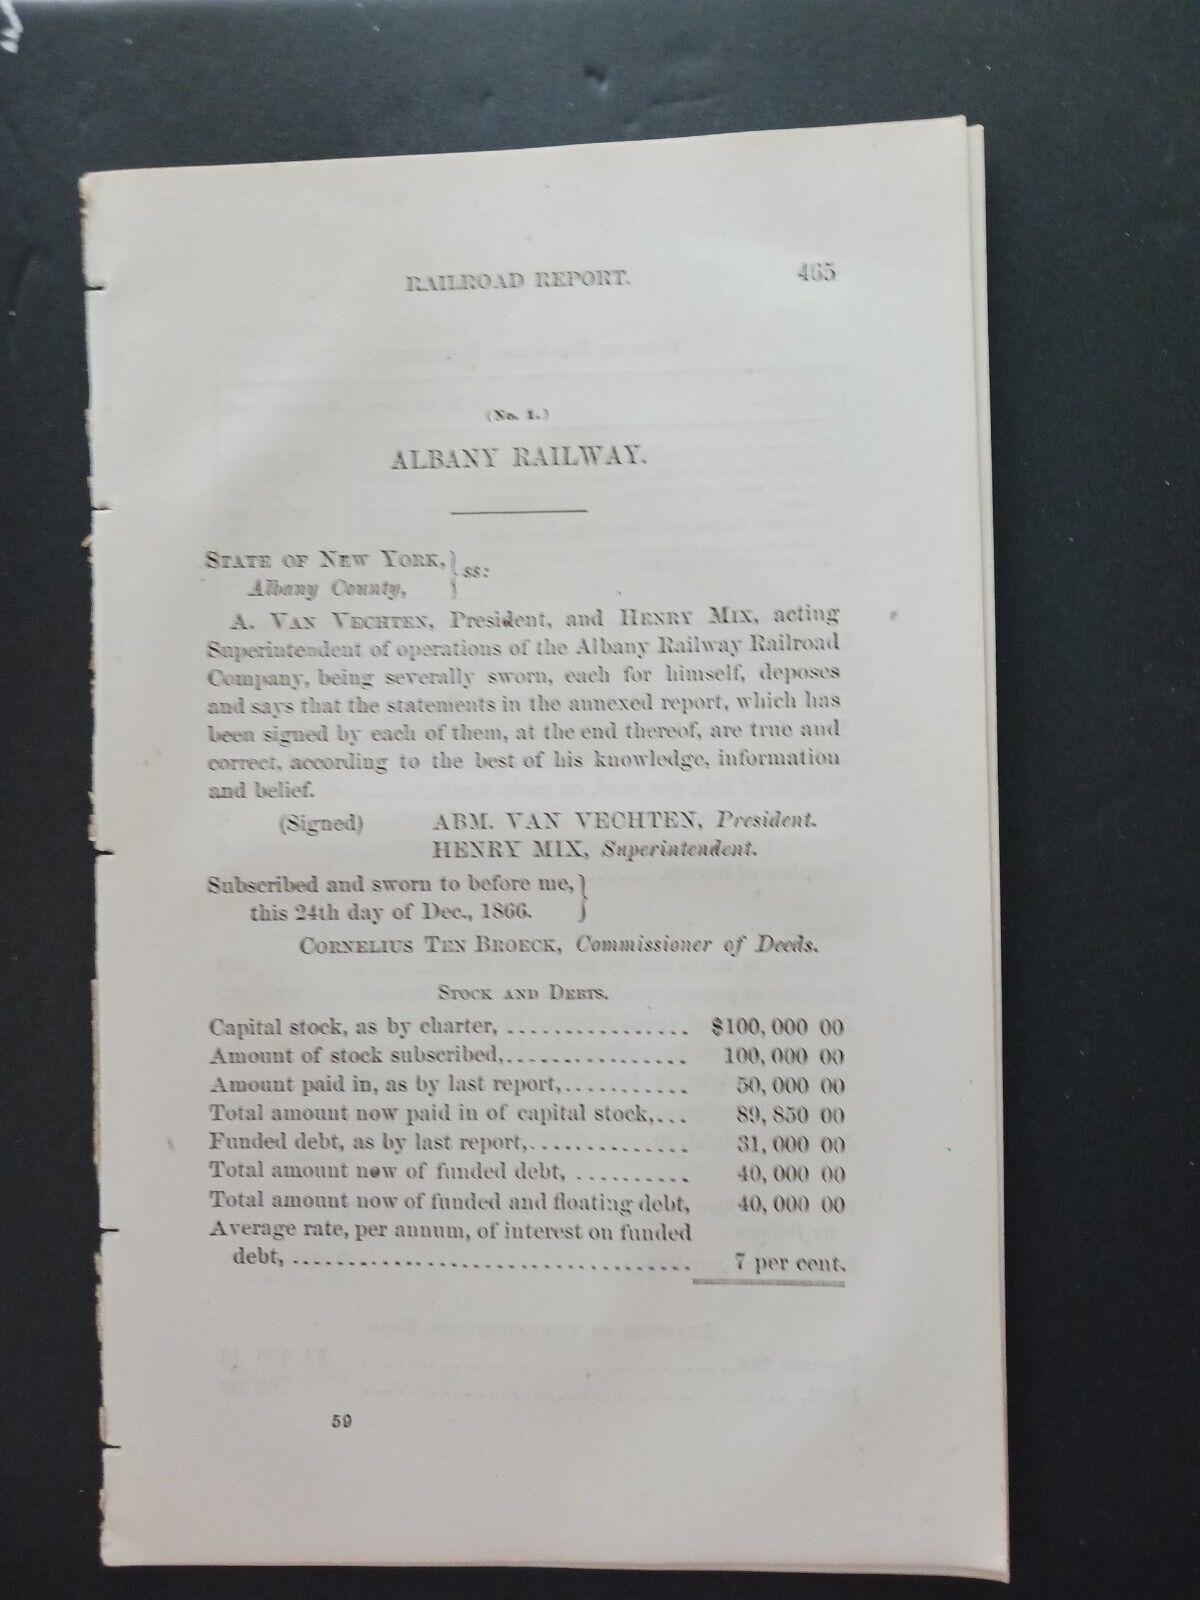 1867 horse railroad report ALBANY RAILWAY South Pearl Street Henry Mix New York